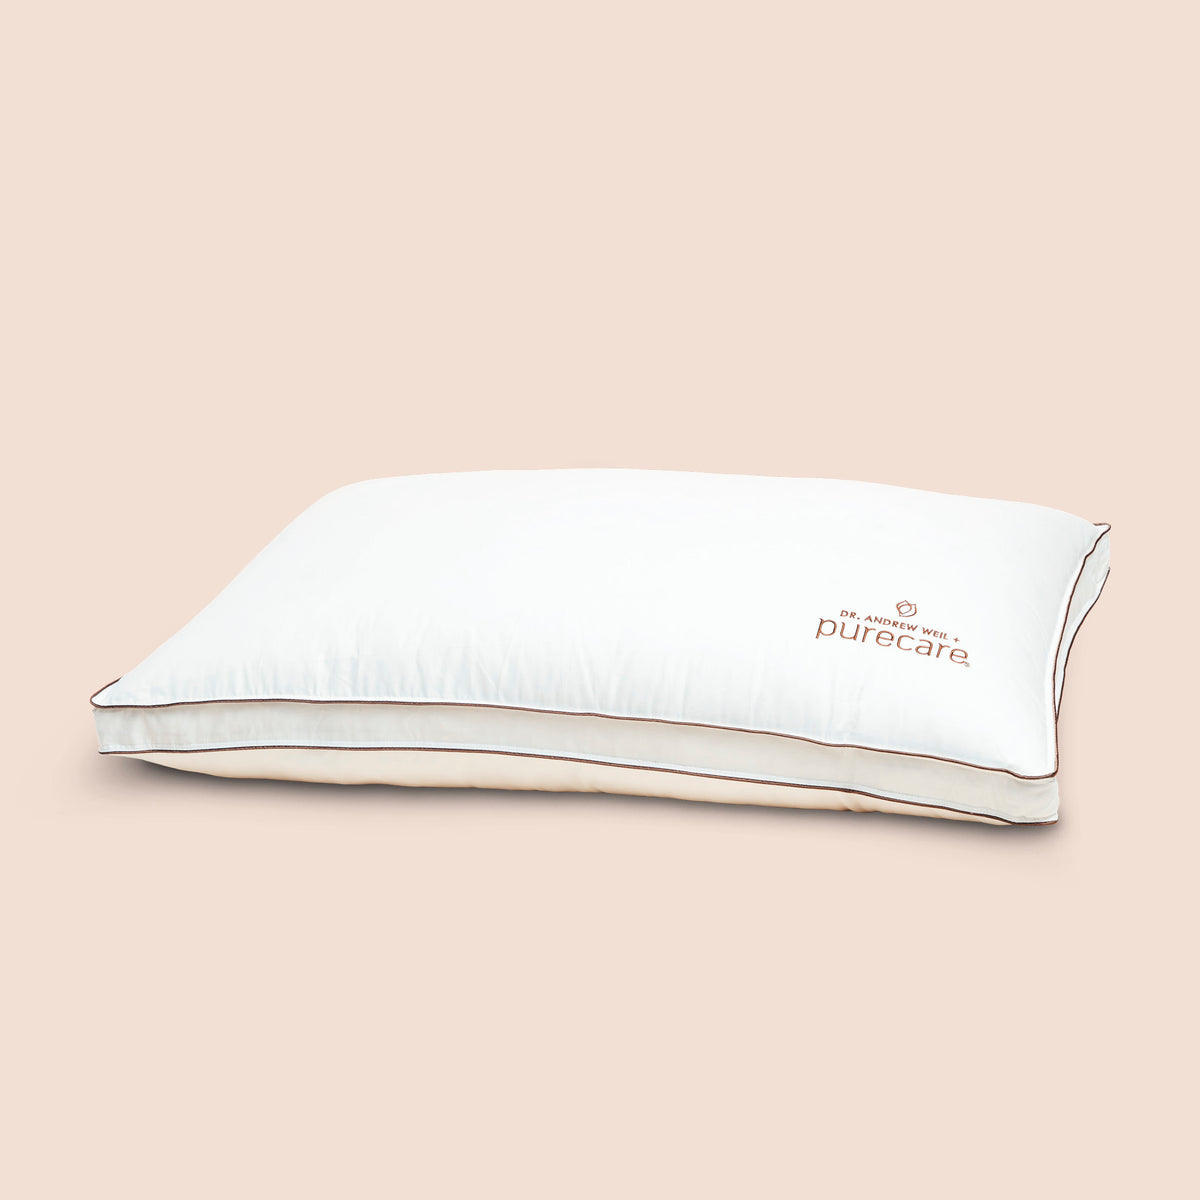 Image of Chambered Down Pillow on light pink background with Dr. Andrew Weil + Purecare logo in bottom right corner of pillow